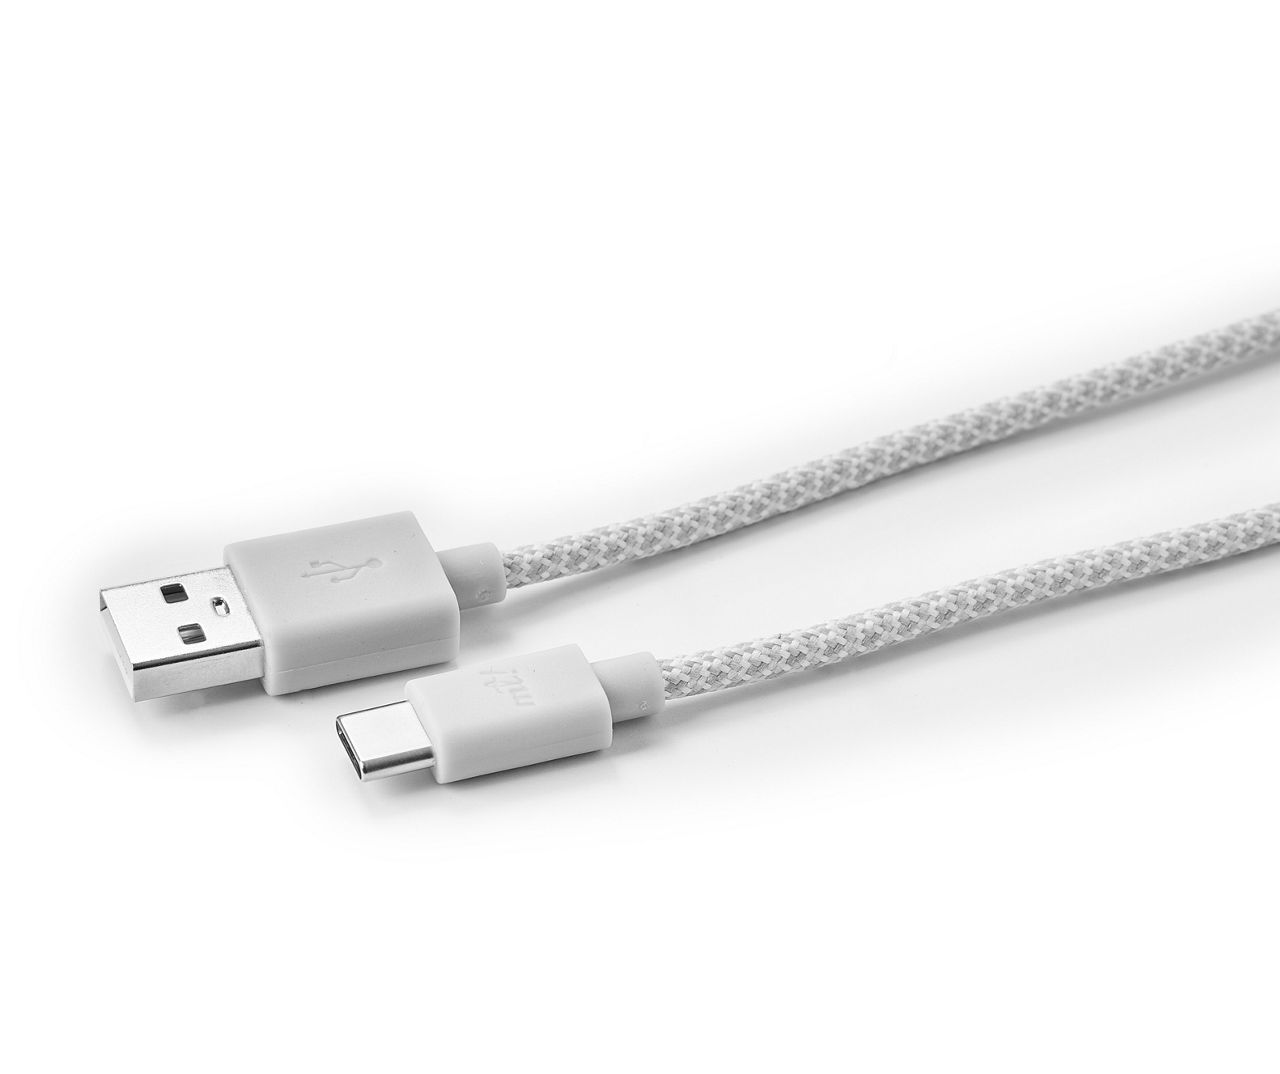 MyTech Gray Braided 10' USB-C Cable